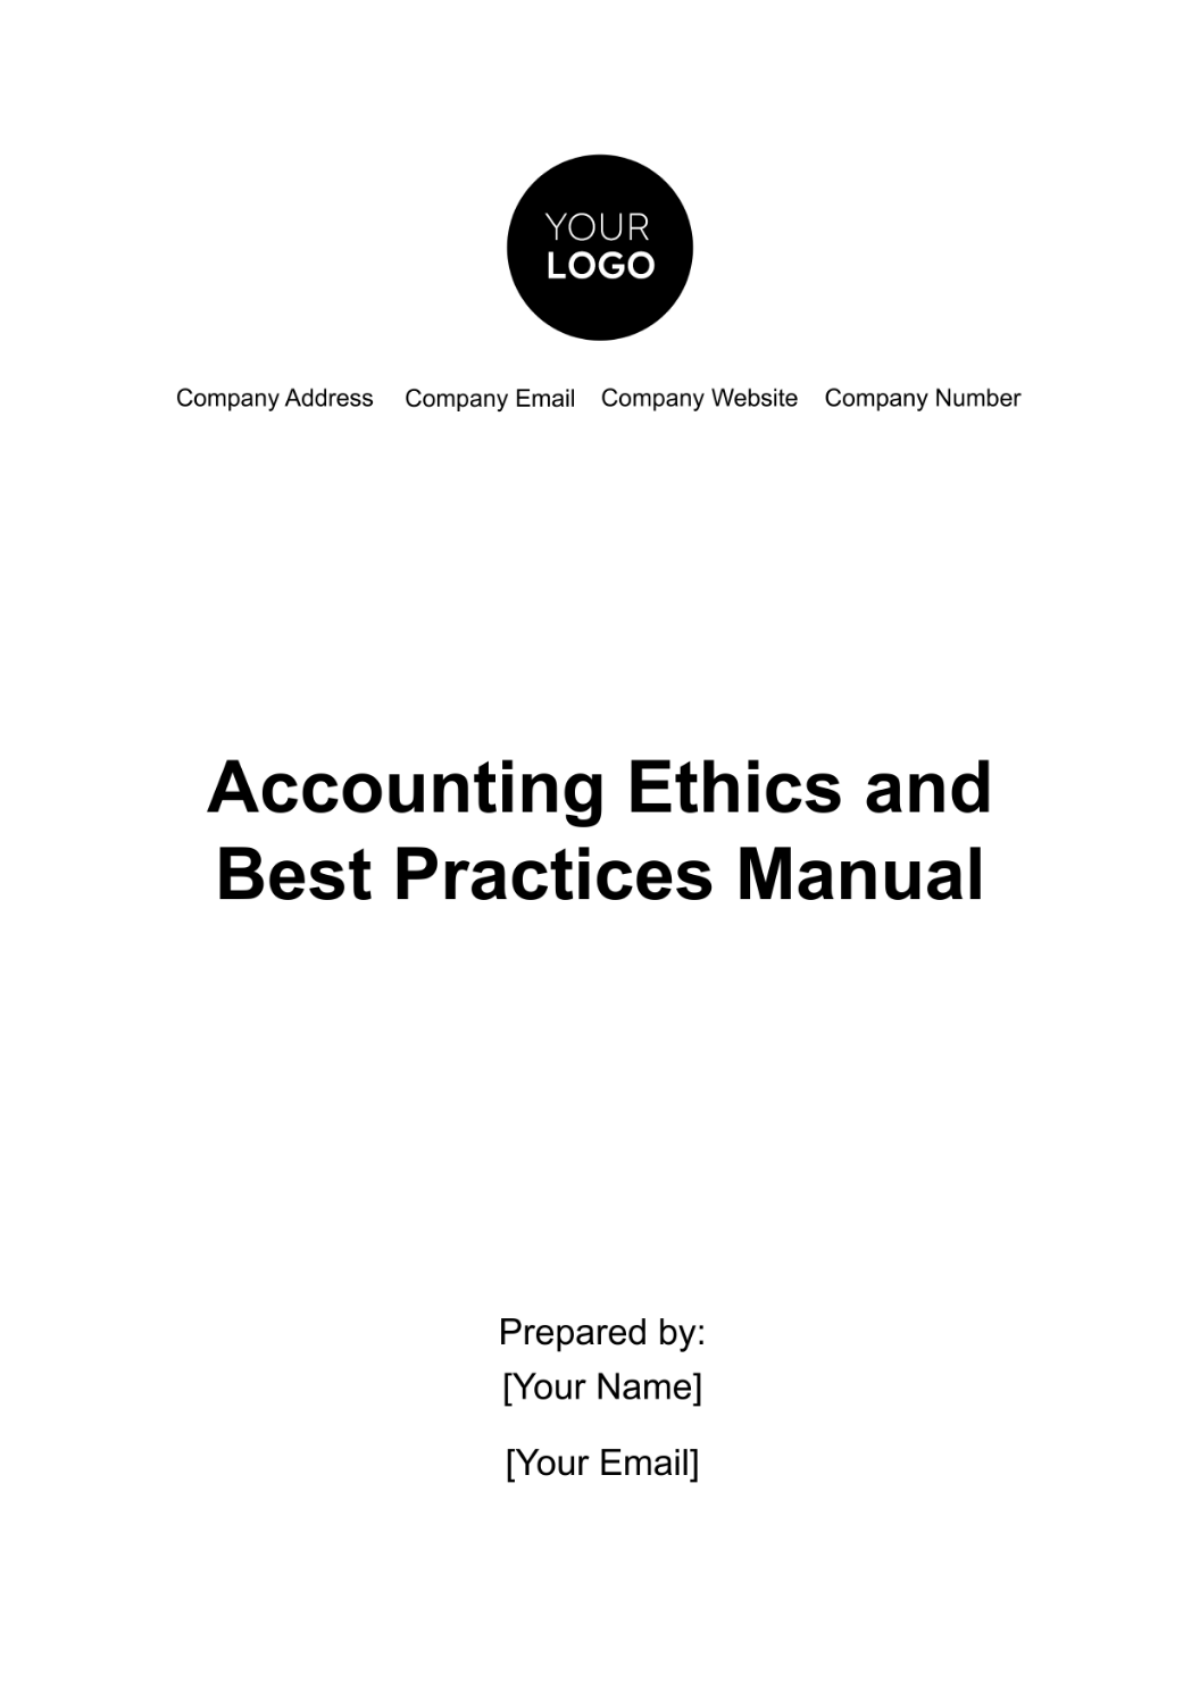 Free Accounting Ethics and Best Practices Manual Template